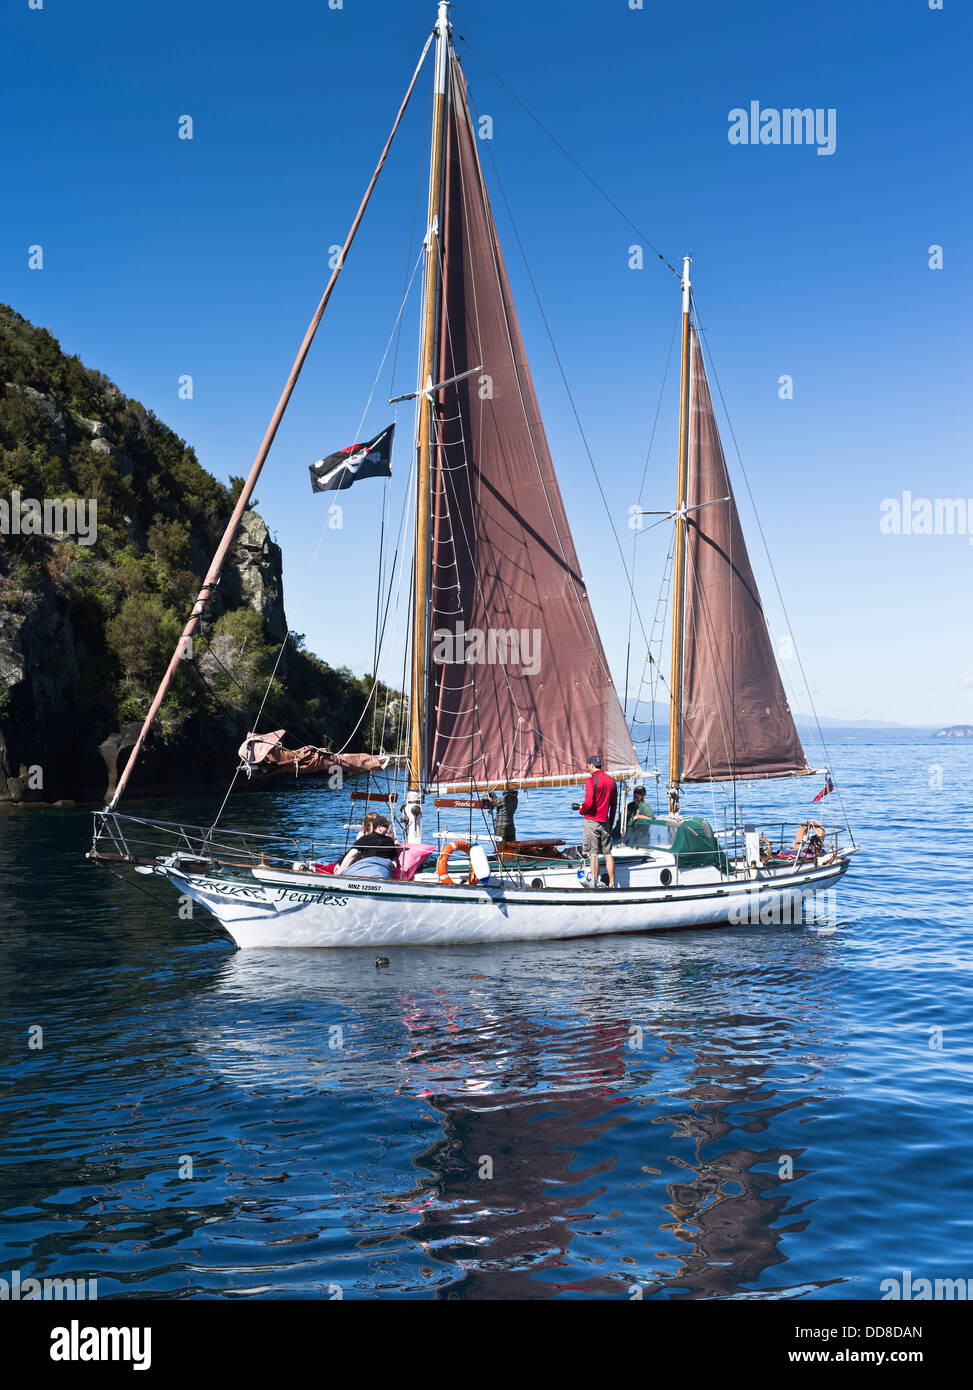 dh Fearless Sailing boat LAKE TAUPO NEW ZEALAND Yacht trip tourists tourist Stock Photo